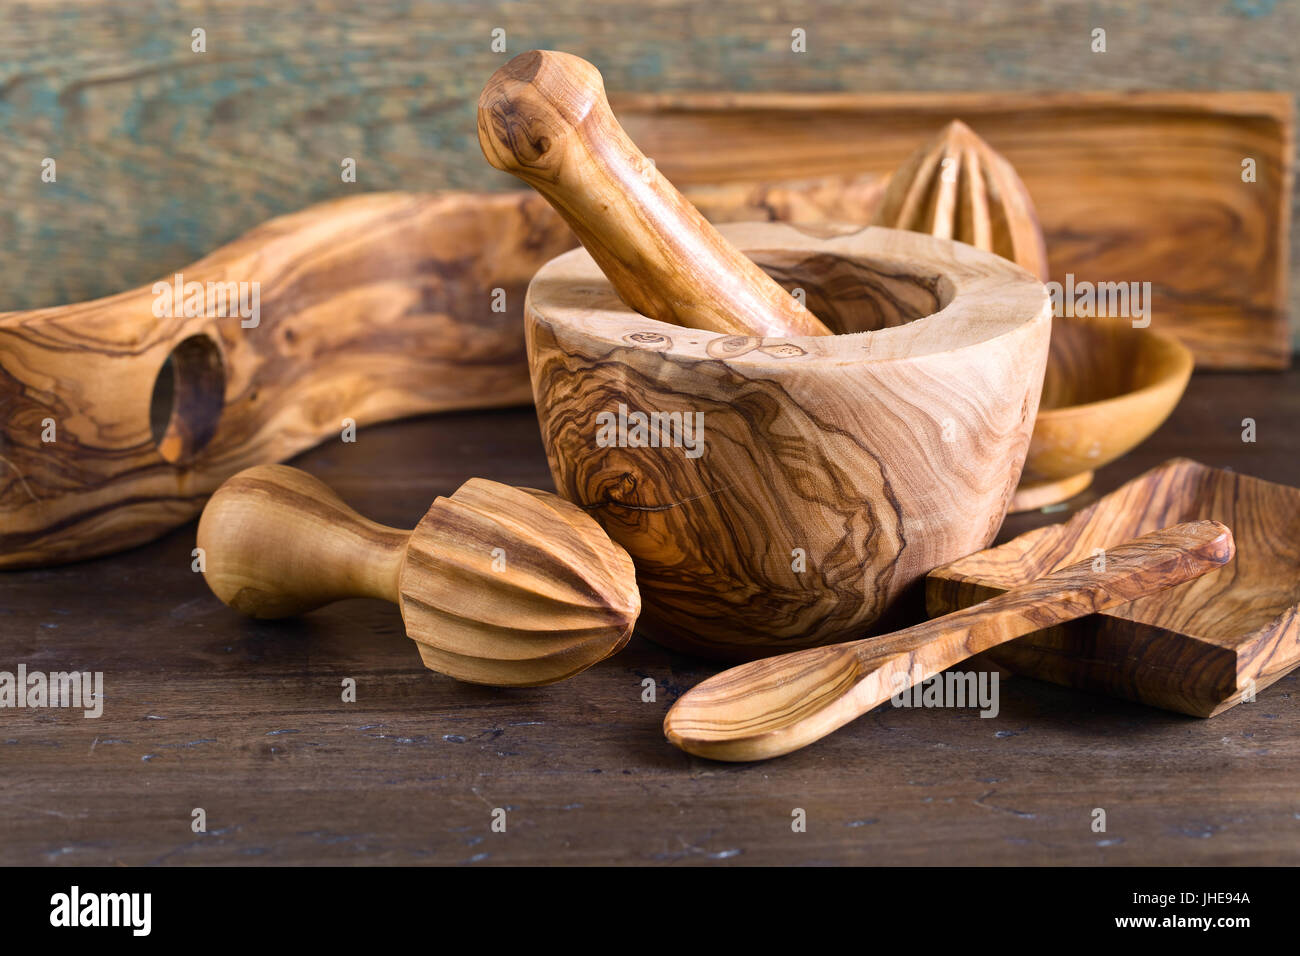 https://c8.alamy.com/comp/JHE94A/set-of-wooden-kitchen-utensils-made-from-olive-wood-JHE94A.jpg